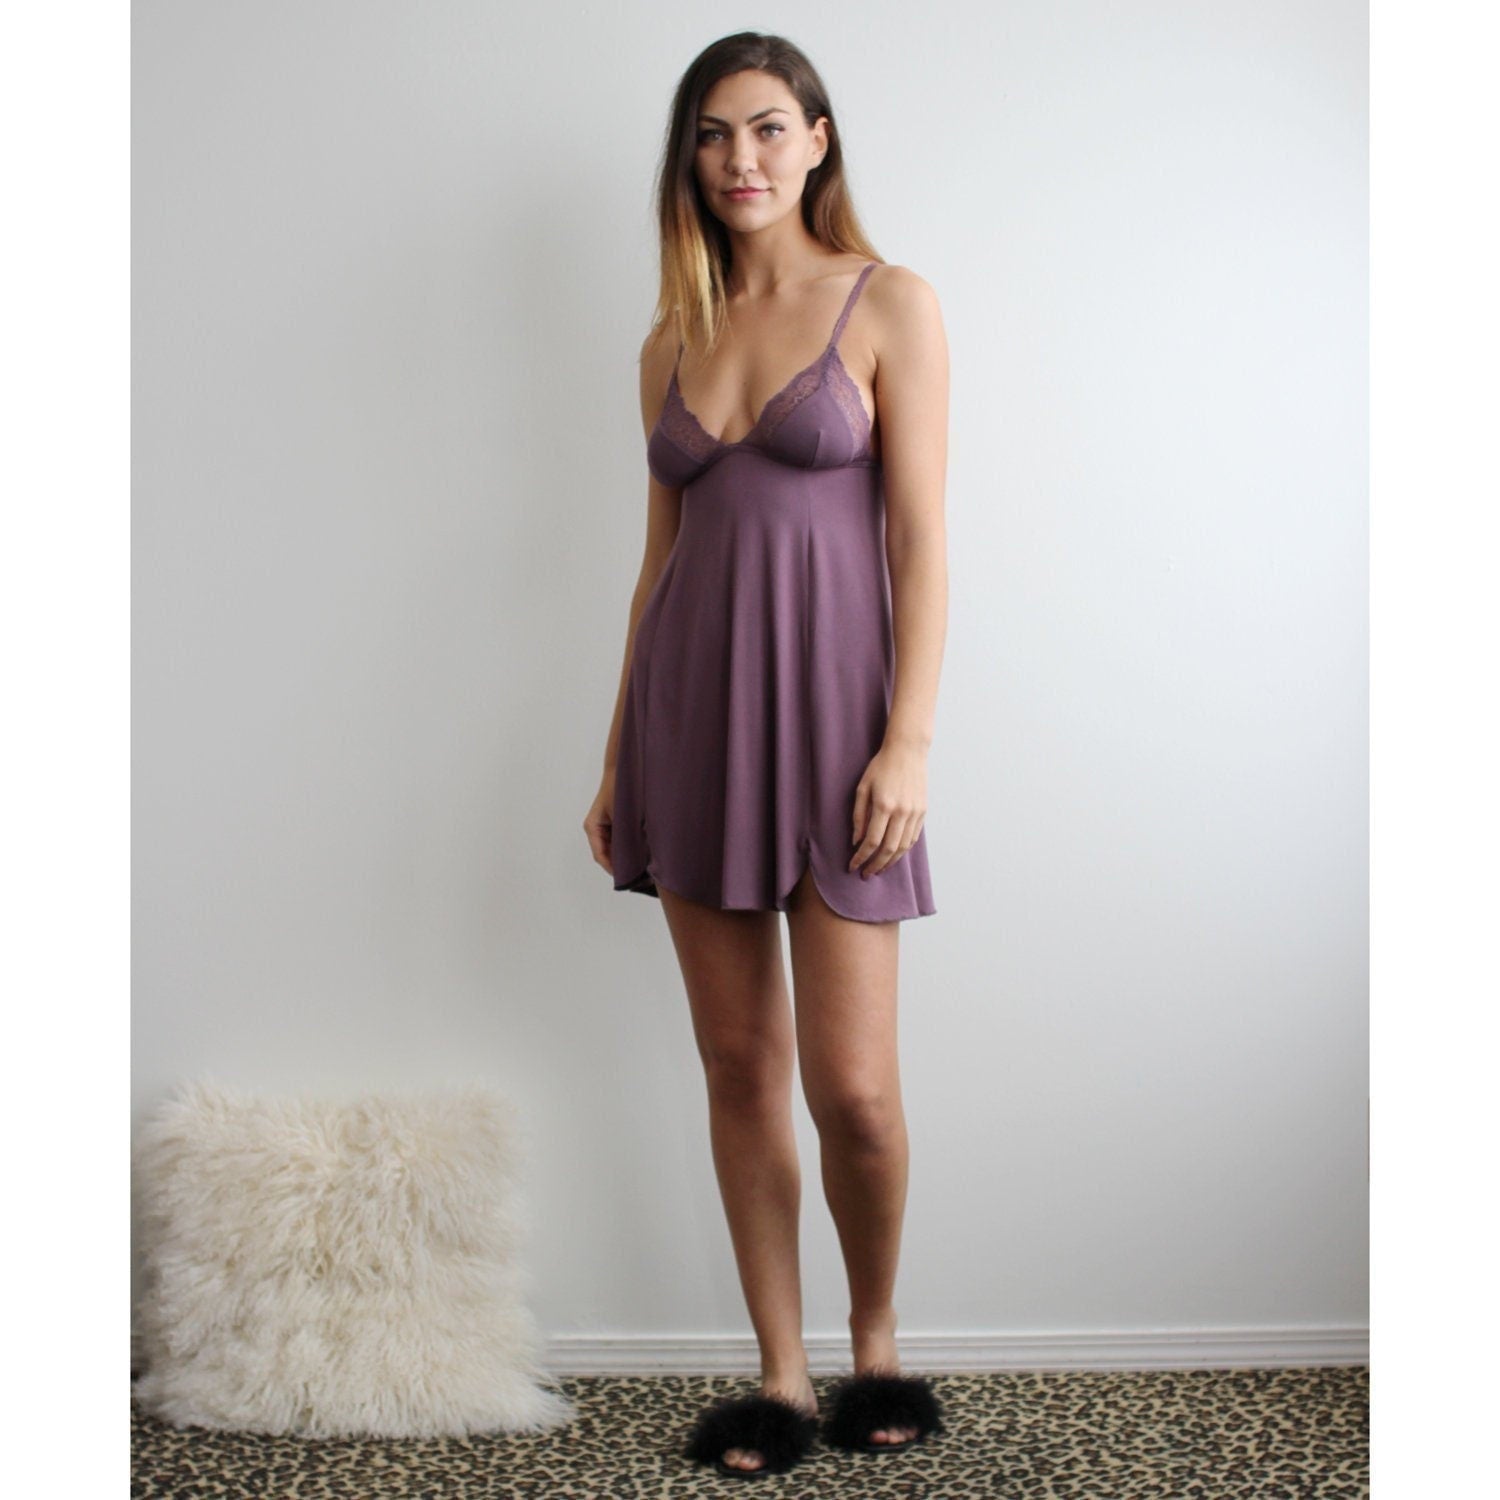 Sleepwear chemise in bamboo with lace trim, Short Nightgown, Purple Lingerie, Ready to Ship, Various Sizes